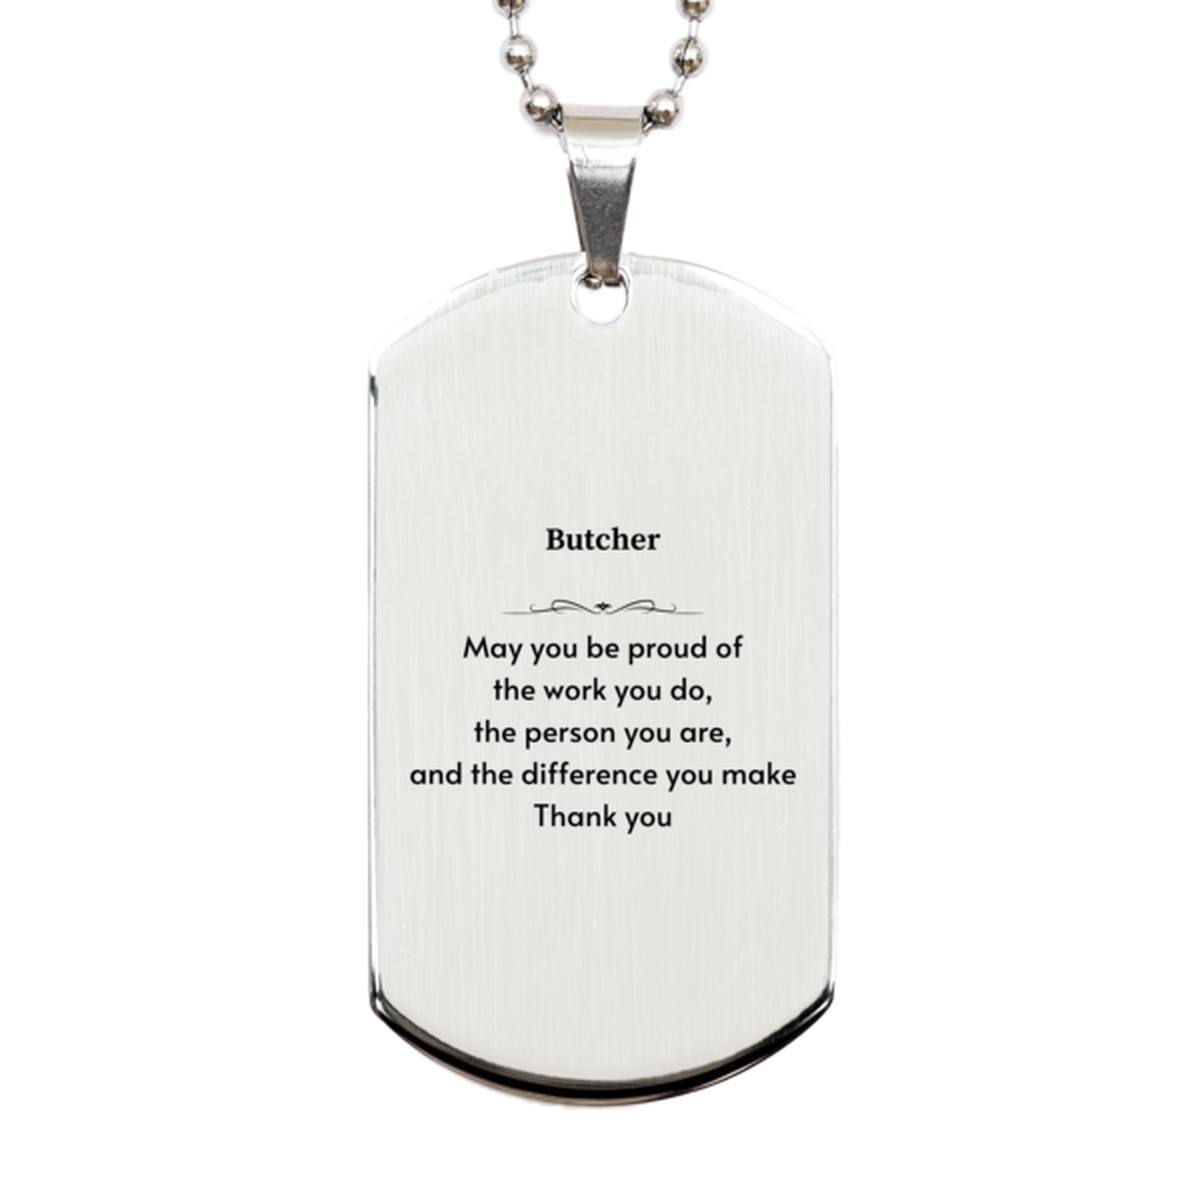 Heartwarming Silver Dog Tag Retirement Coworkers Gifts for Butcher, Butcher May You be proud of the work you do, the person you are Gifts for Boss Men Women Friends